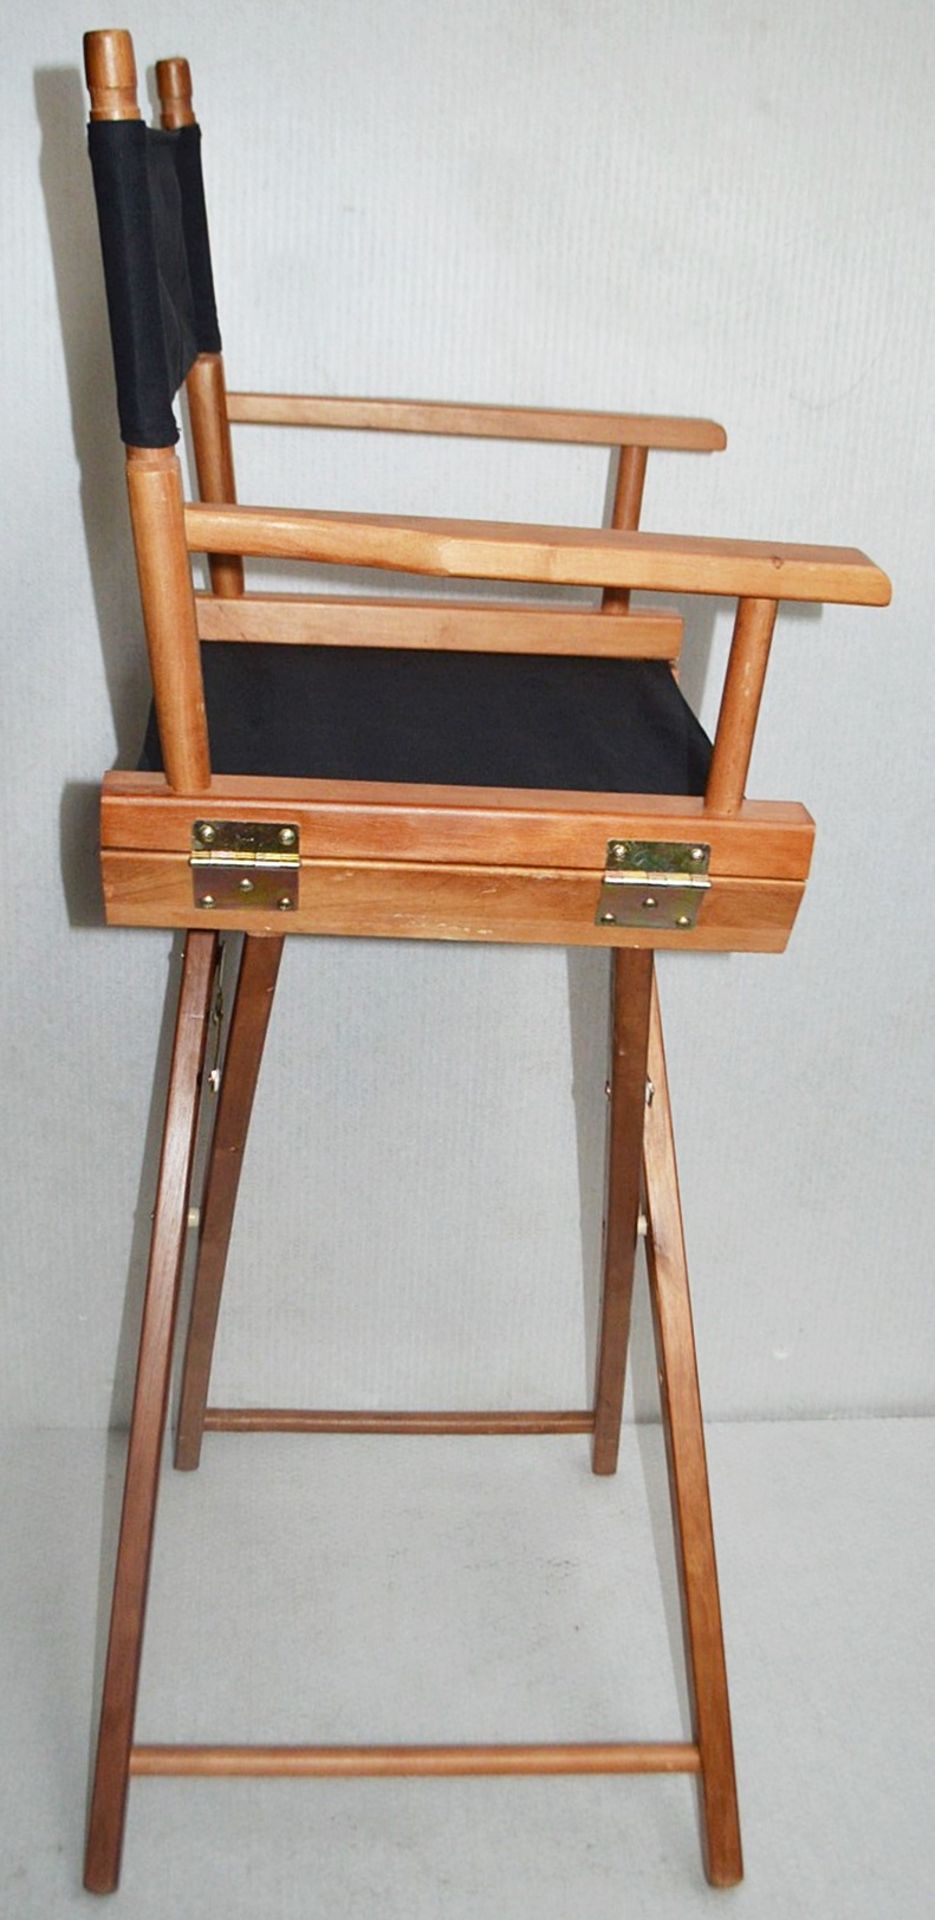 1 x Professional Tall Folding Directors Chair - Ex-Display Prop - Dimensions (Approx): H120 x W52 - Image 2 of 4